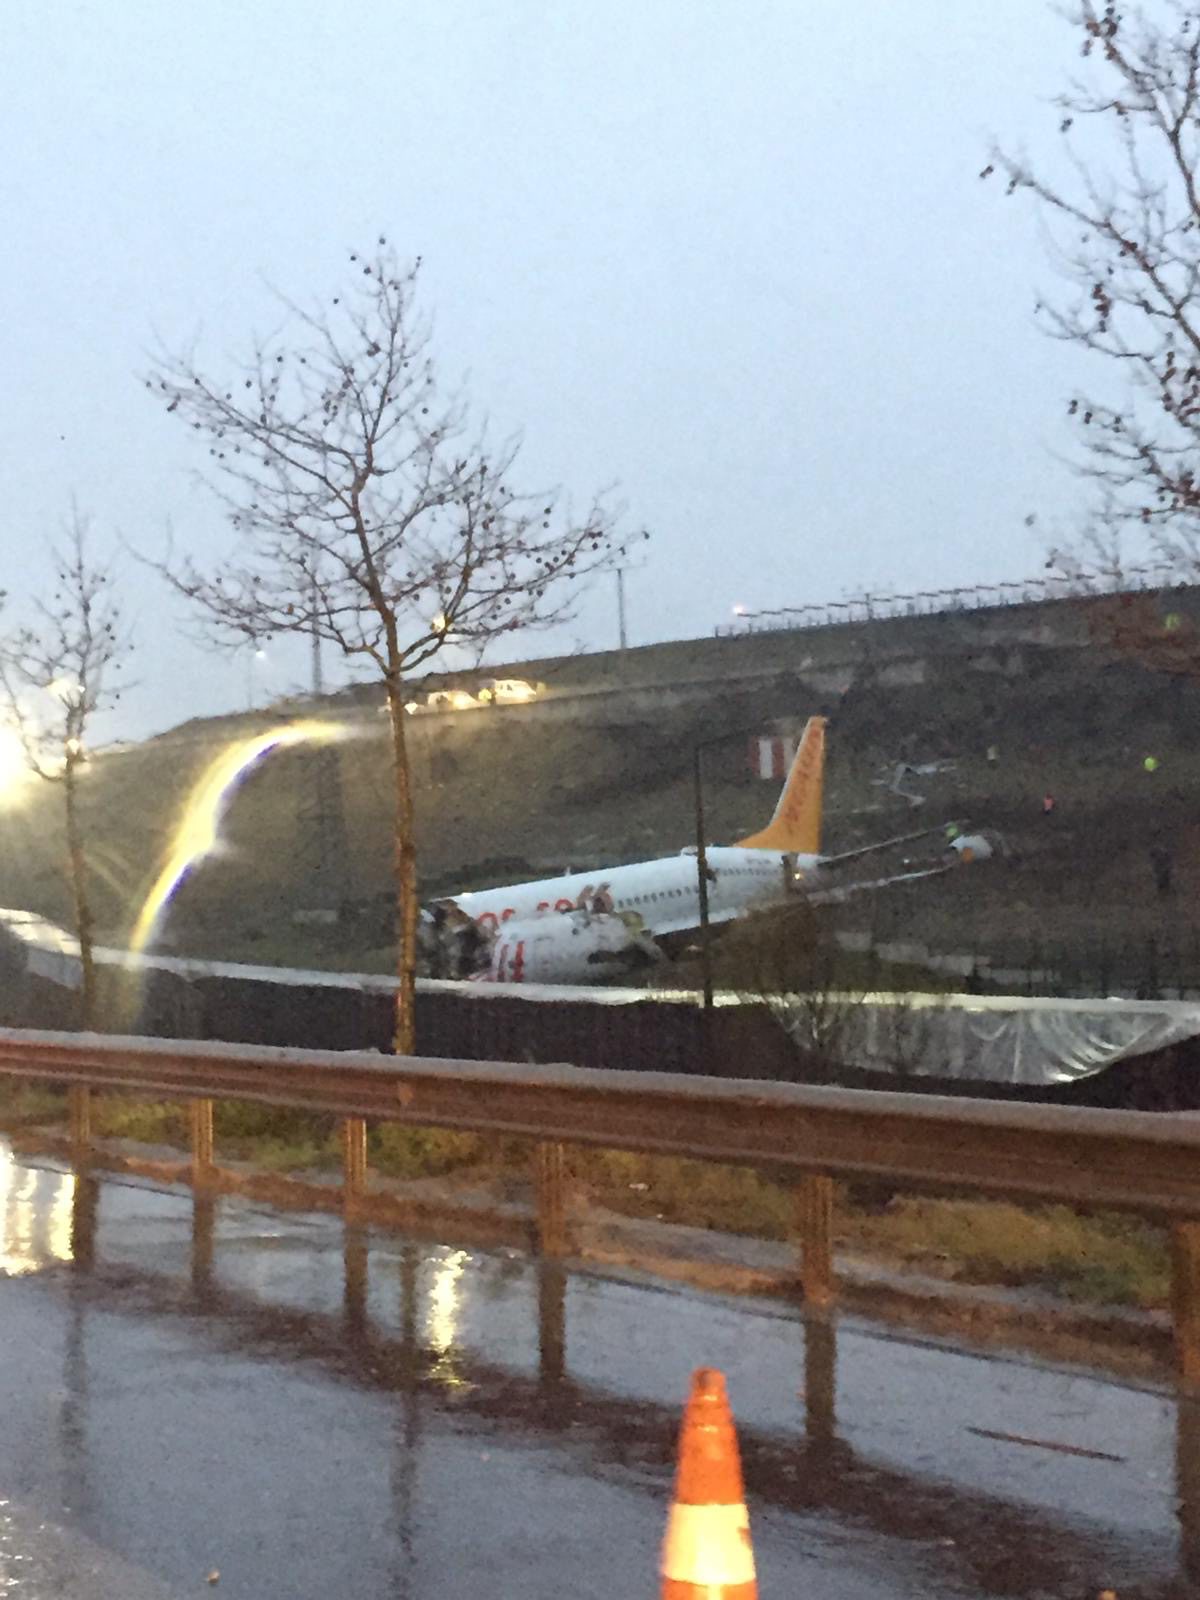 This picture taken on February 05, 2020, shows a Pegasus airlines boeing 737 plane after it skidded off the runway at Istanbul's Sabiha Gokcen airport. - A plane carrying 171 passengers skidded off the runway at an Istanbul airport and split into two after landing in rough weather on February 05, but officials said no-one had died. The aircraft had flown into Istanbul's Sabiha Gokcen airport from the Aegean city of Izmir in very wet weather, NTV broadcaster reported. At least 21 people were injured and taken to hospital, Istanbul Governor Ali Yerlikaya said on Twitter. 